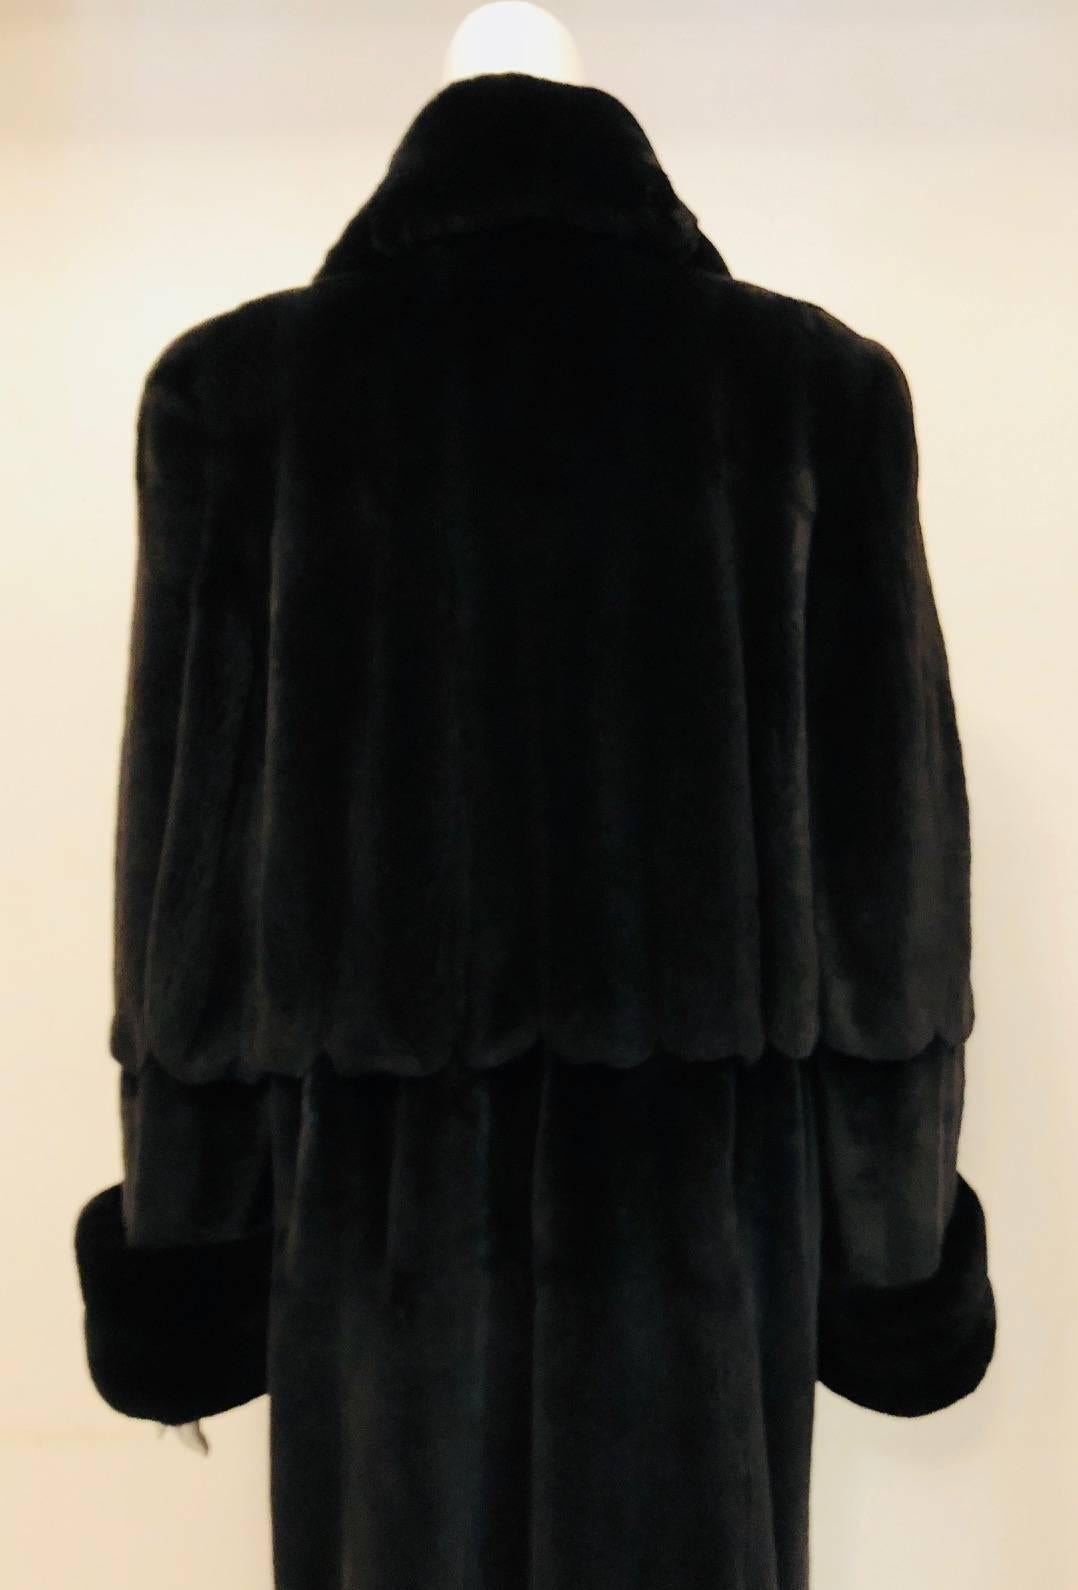 Marshall Fields Black Sheared Mink Long Coat w/ Round Collar & Turned Up Cuff 1